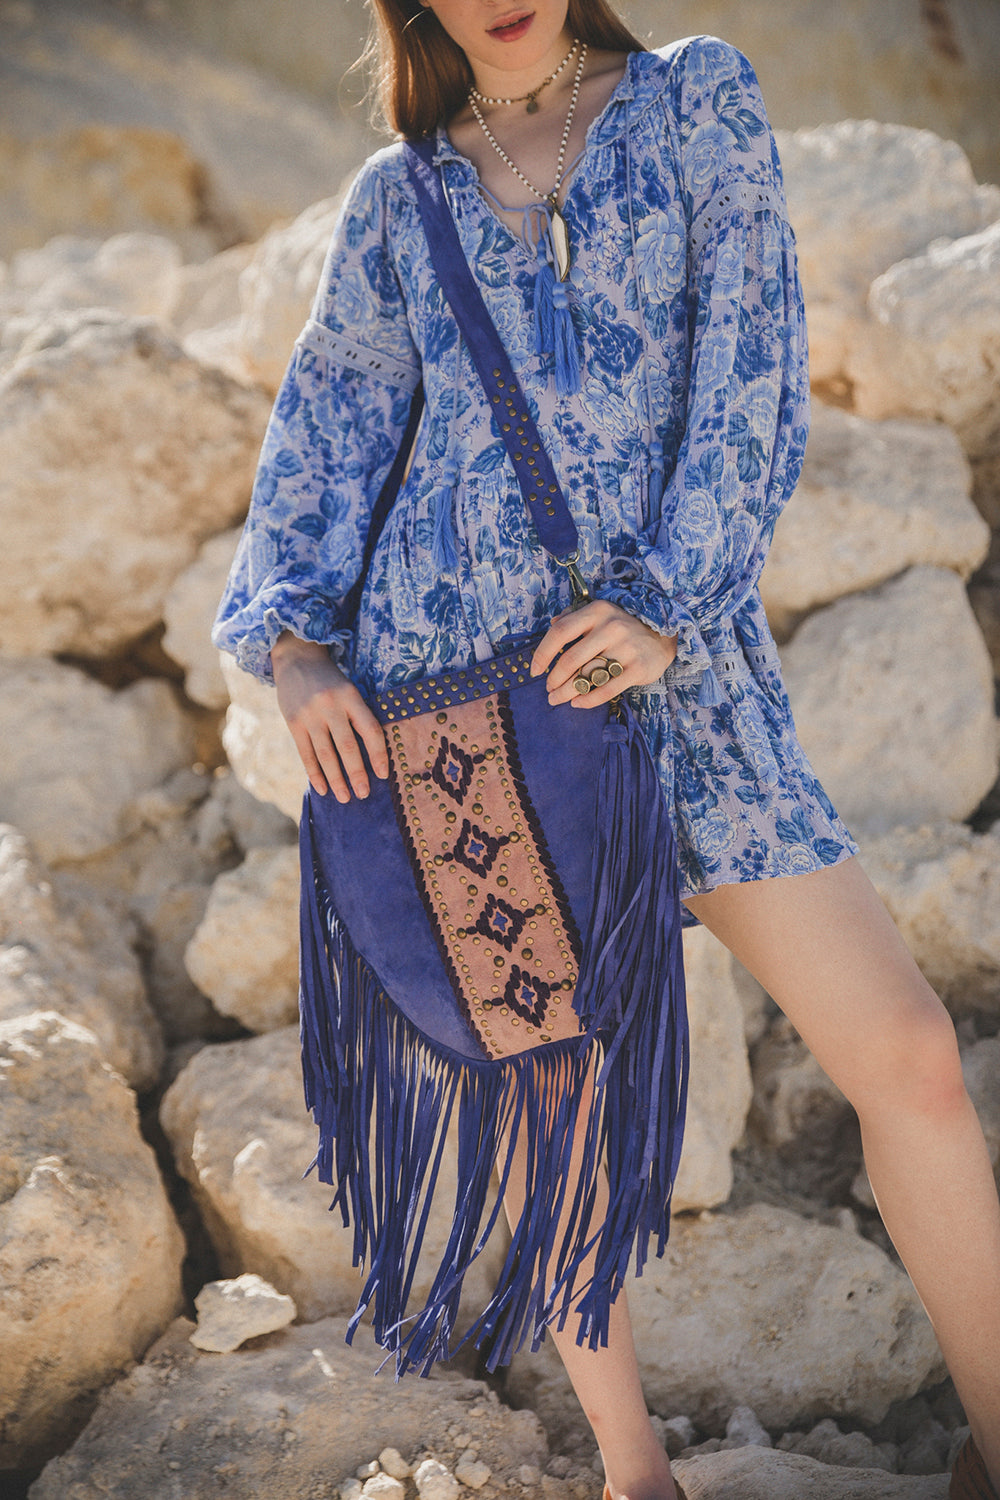 Ayana Tassel Bag - Ibiza Blue - Peony by Tulle and Batiste - Ethical Slow Fashion - Free Shipping - Easy Returns